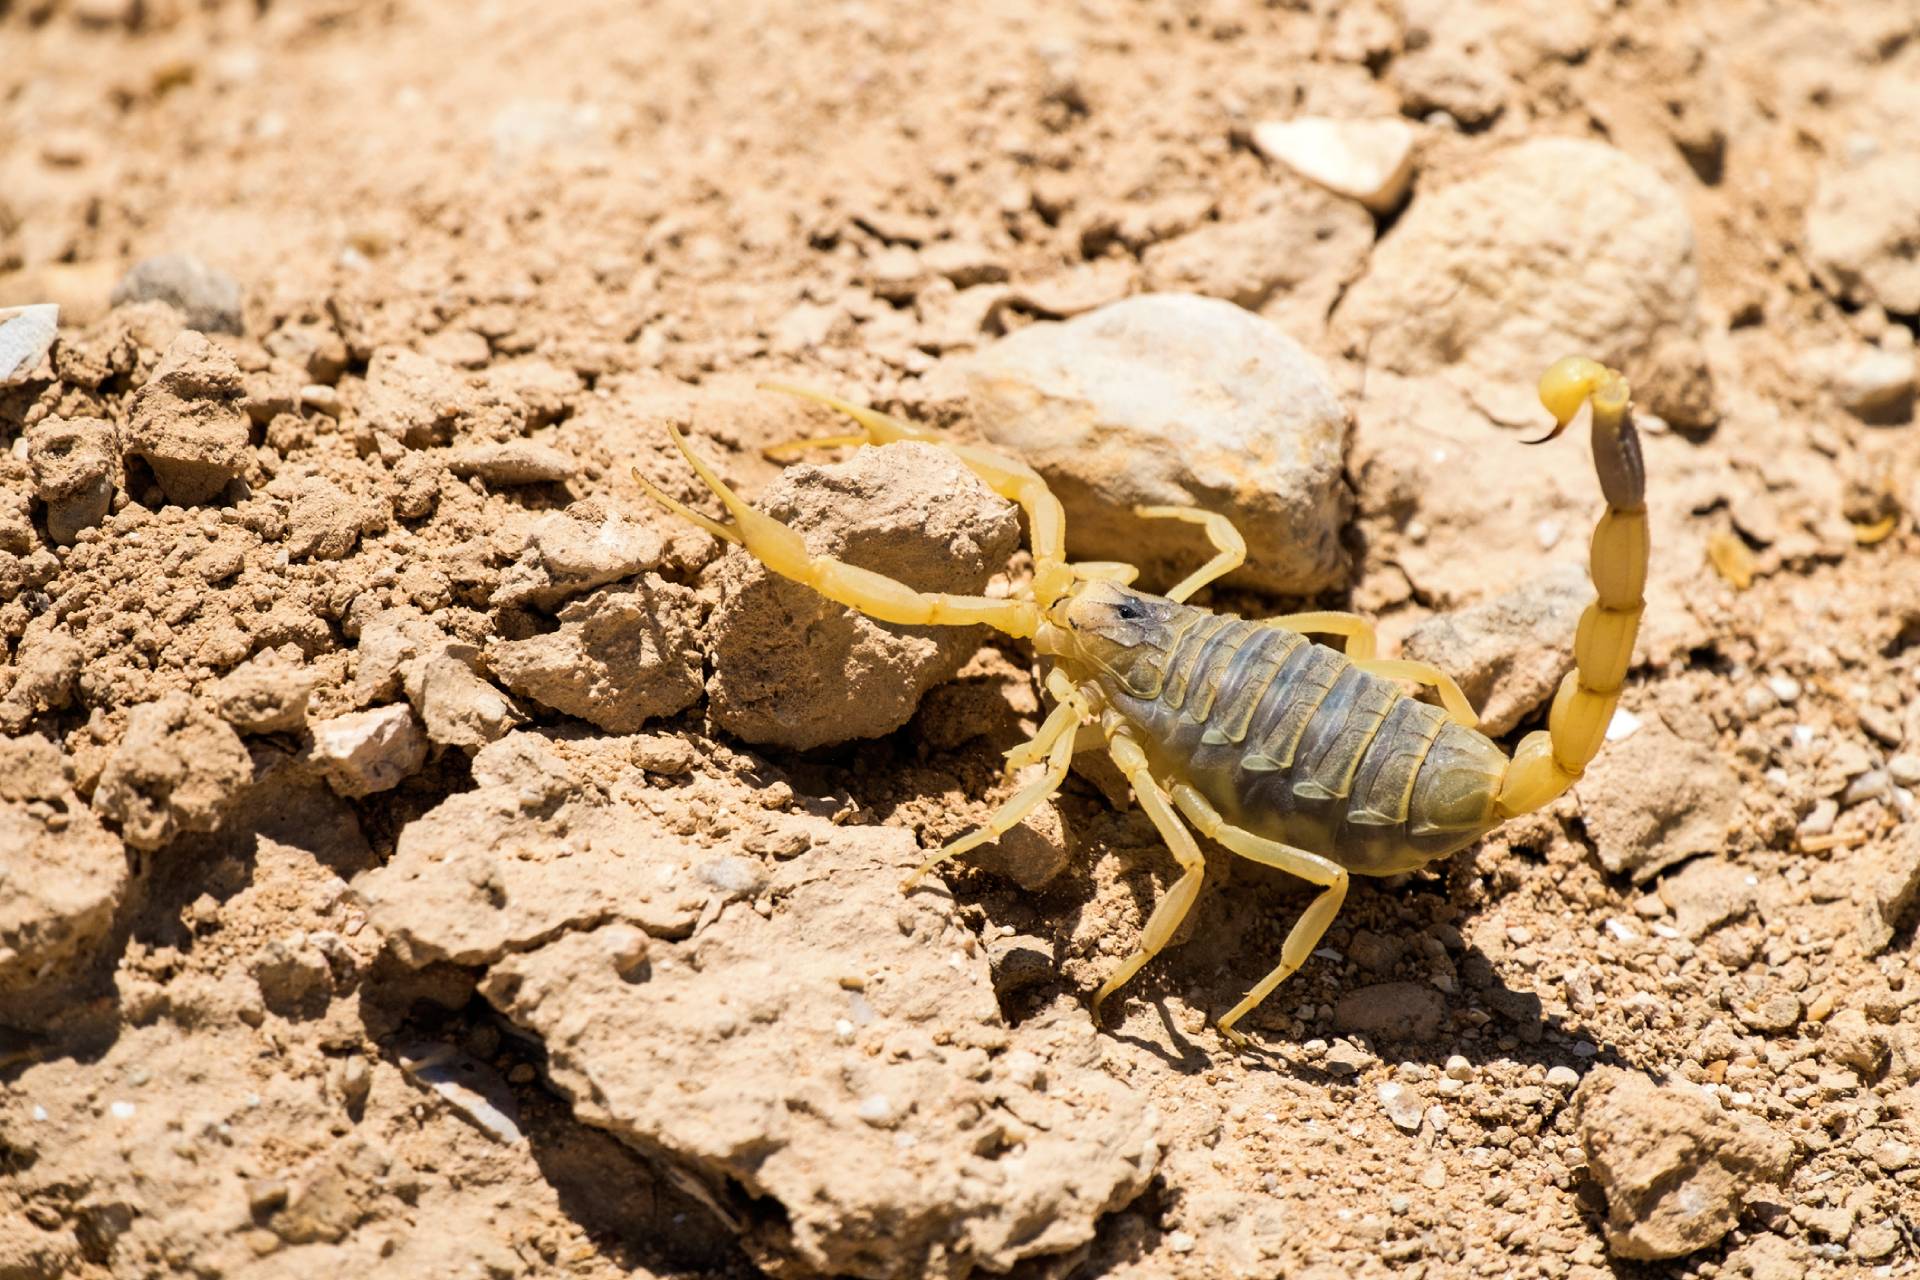 Types of Scorpions: A Helpful Guide